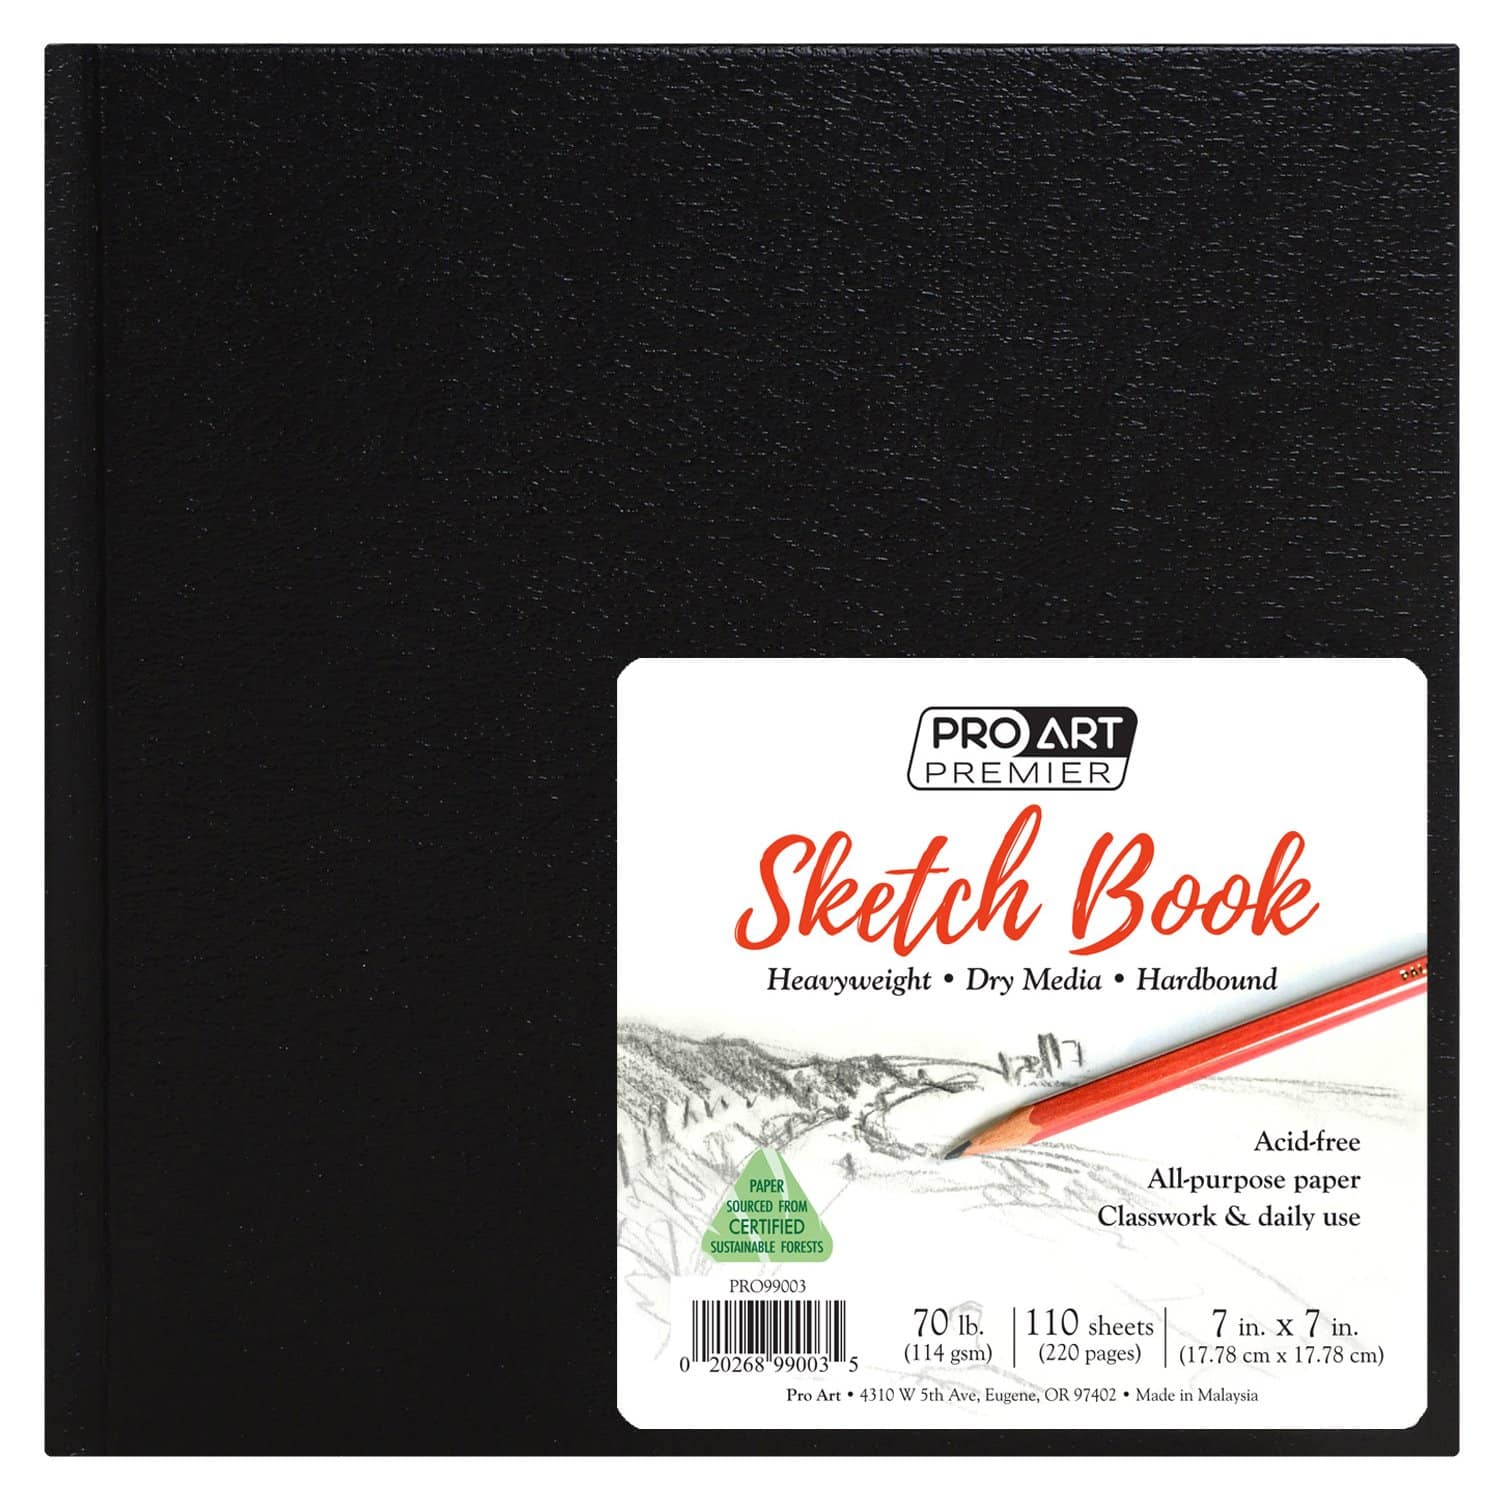  Black Hardbound Sketchbook by Artist's Loft - Acid Free and  Smudge Resistant Paper, Sketch Pad for Drawing, Sketching, Writing - 1 Pack  : Arts, Crafts & Sewing